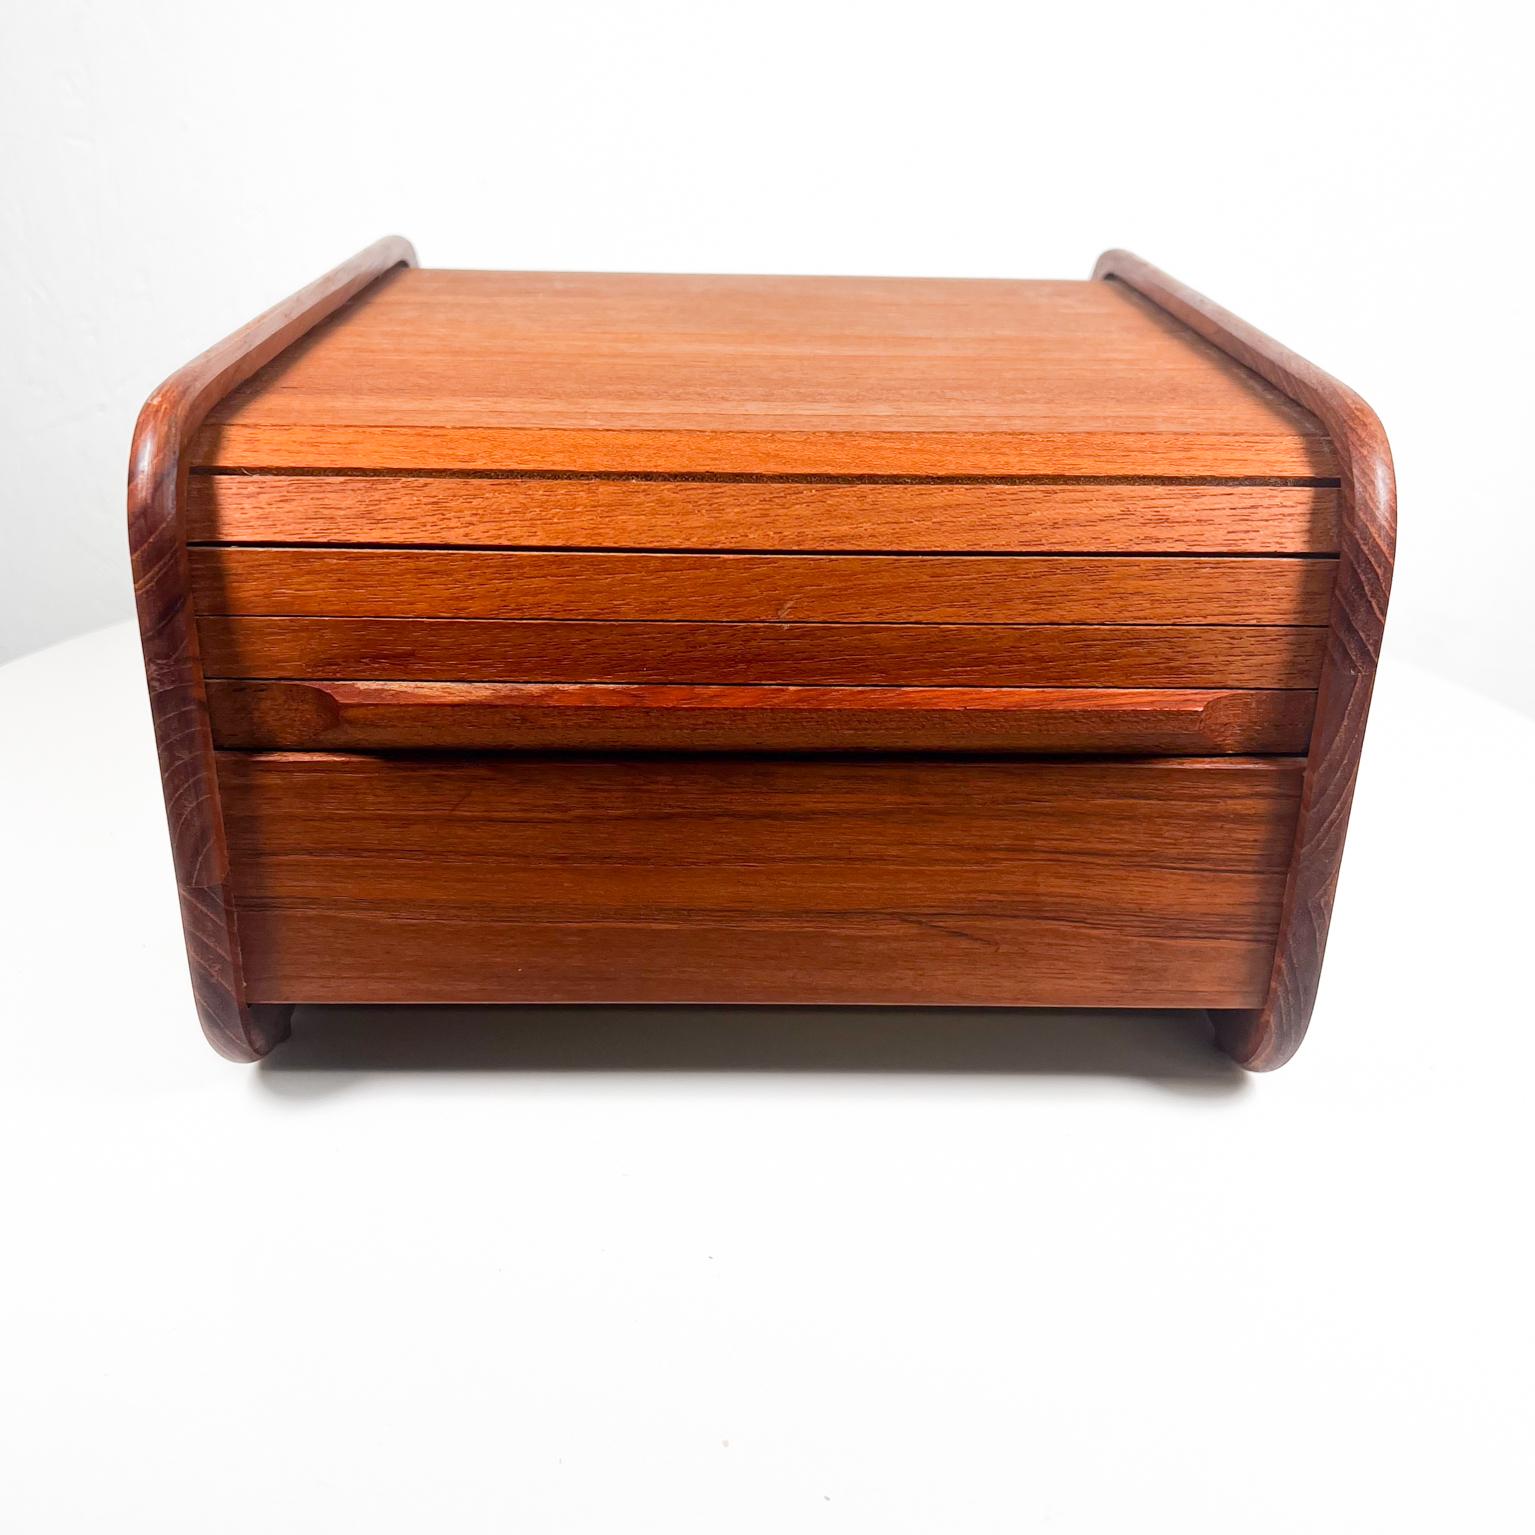 1970s Cassette Holder in Teakwood Tambour Door
8.38 w x 11 d x 6.25 h
Preowned original vintage condition.
See images please.